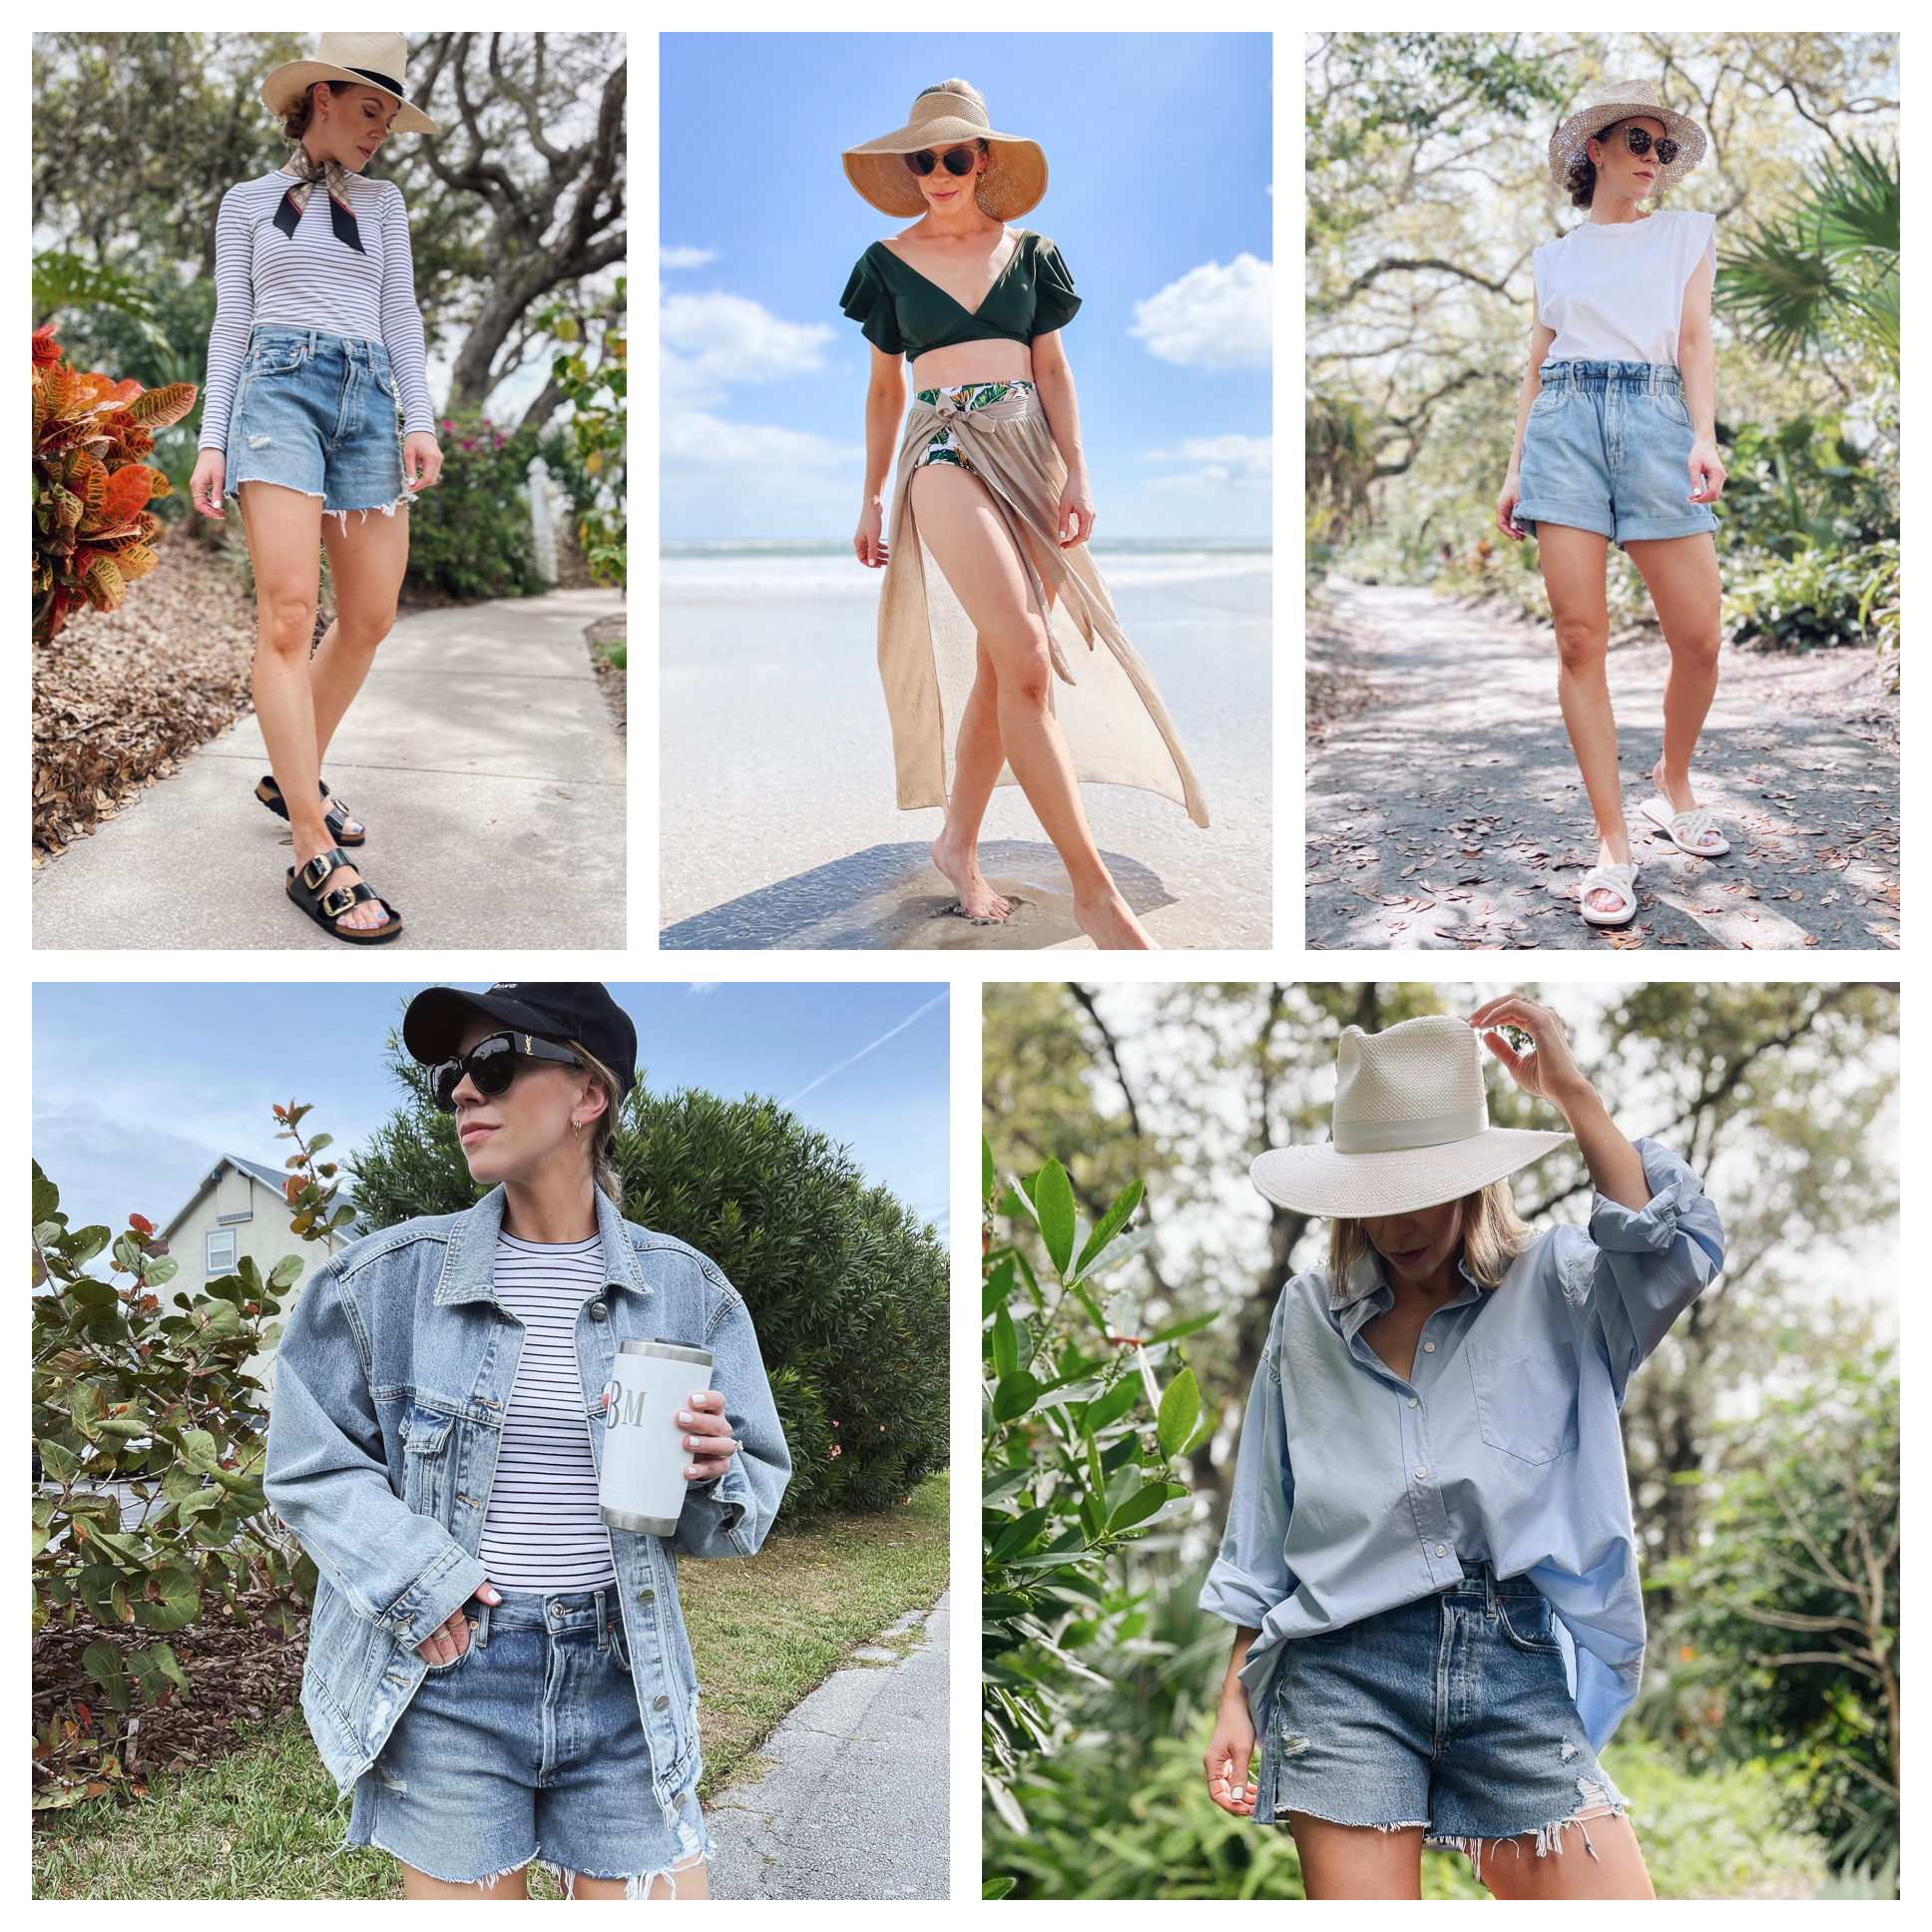 Meagan Brandon of Meagan's Moda shares what to wear and pack for spring break in Florida, vacation style outfits